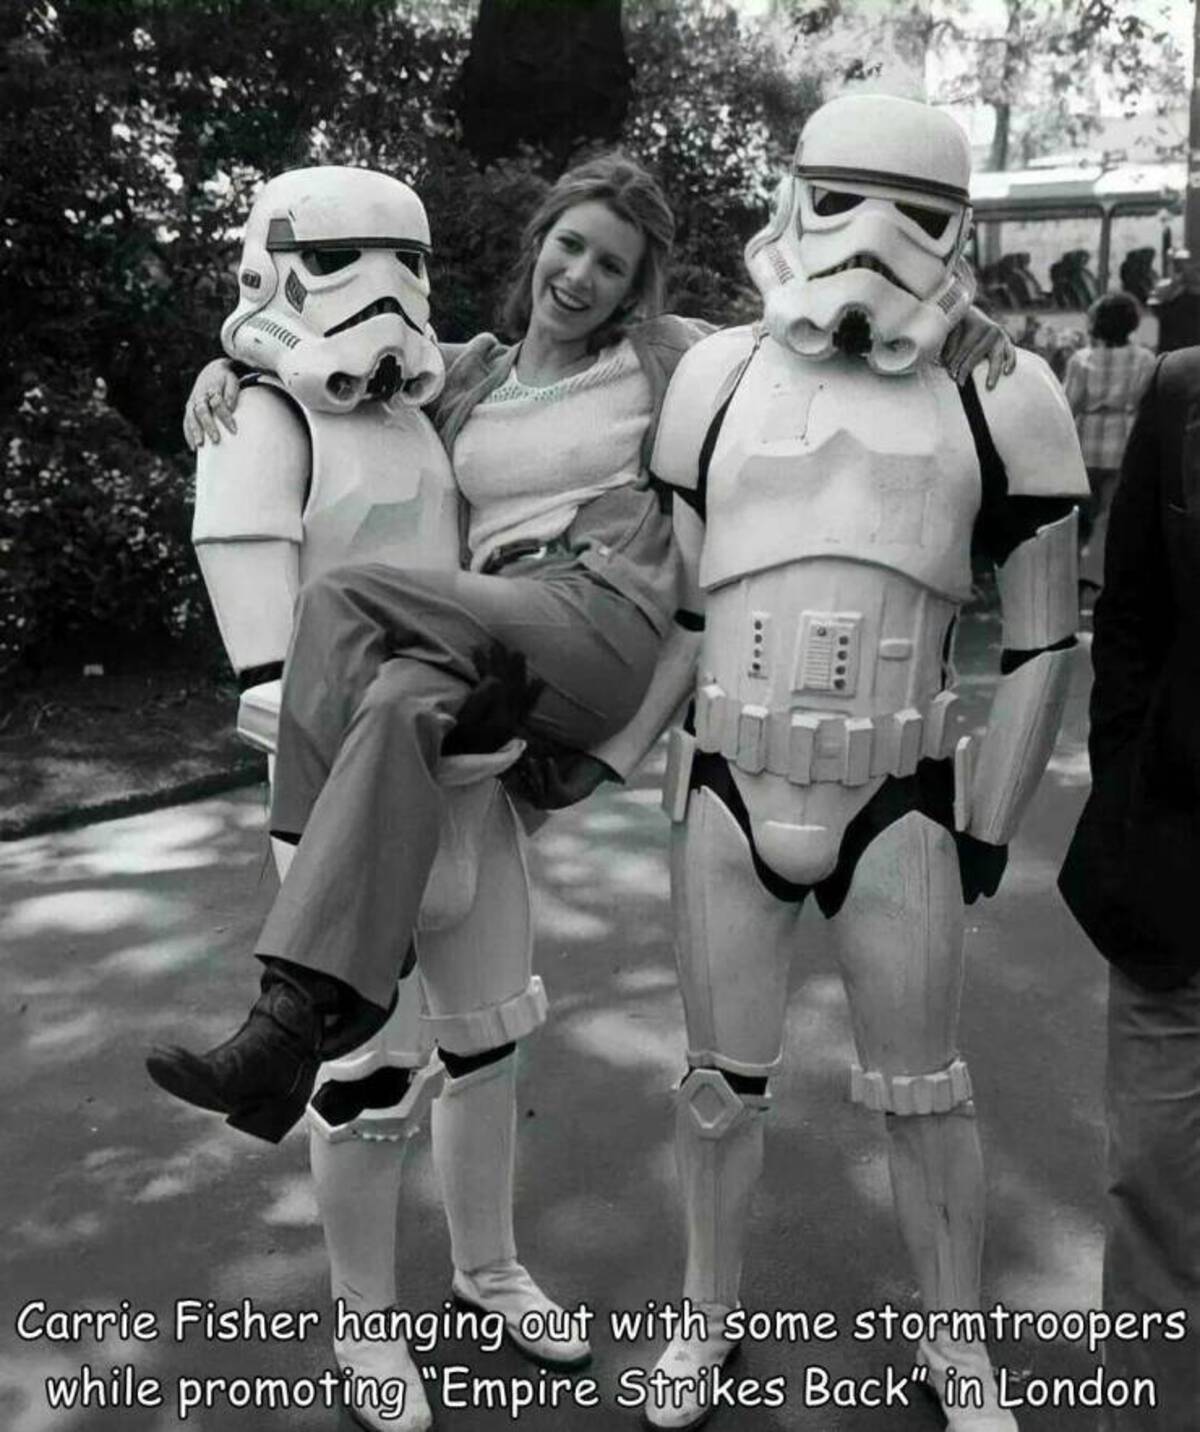 storm troopers cheering - Carrie Fisher hanging out with some stormtroopers while promoting "Empire Strikes Back" in London